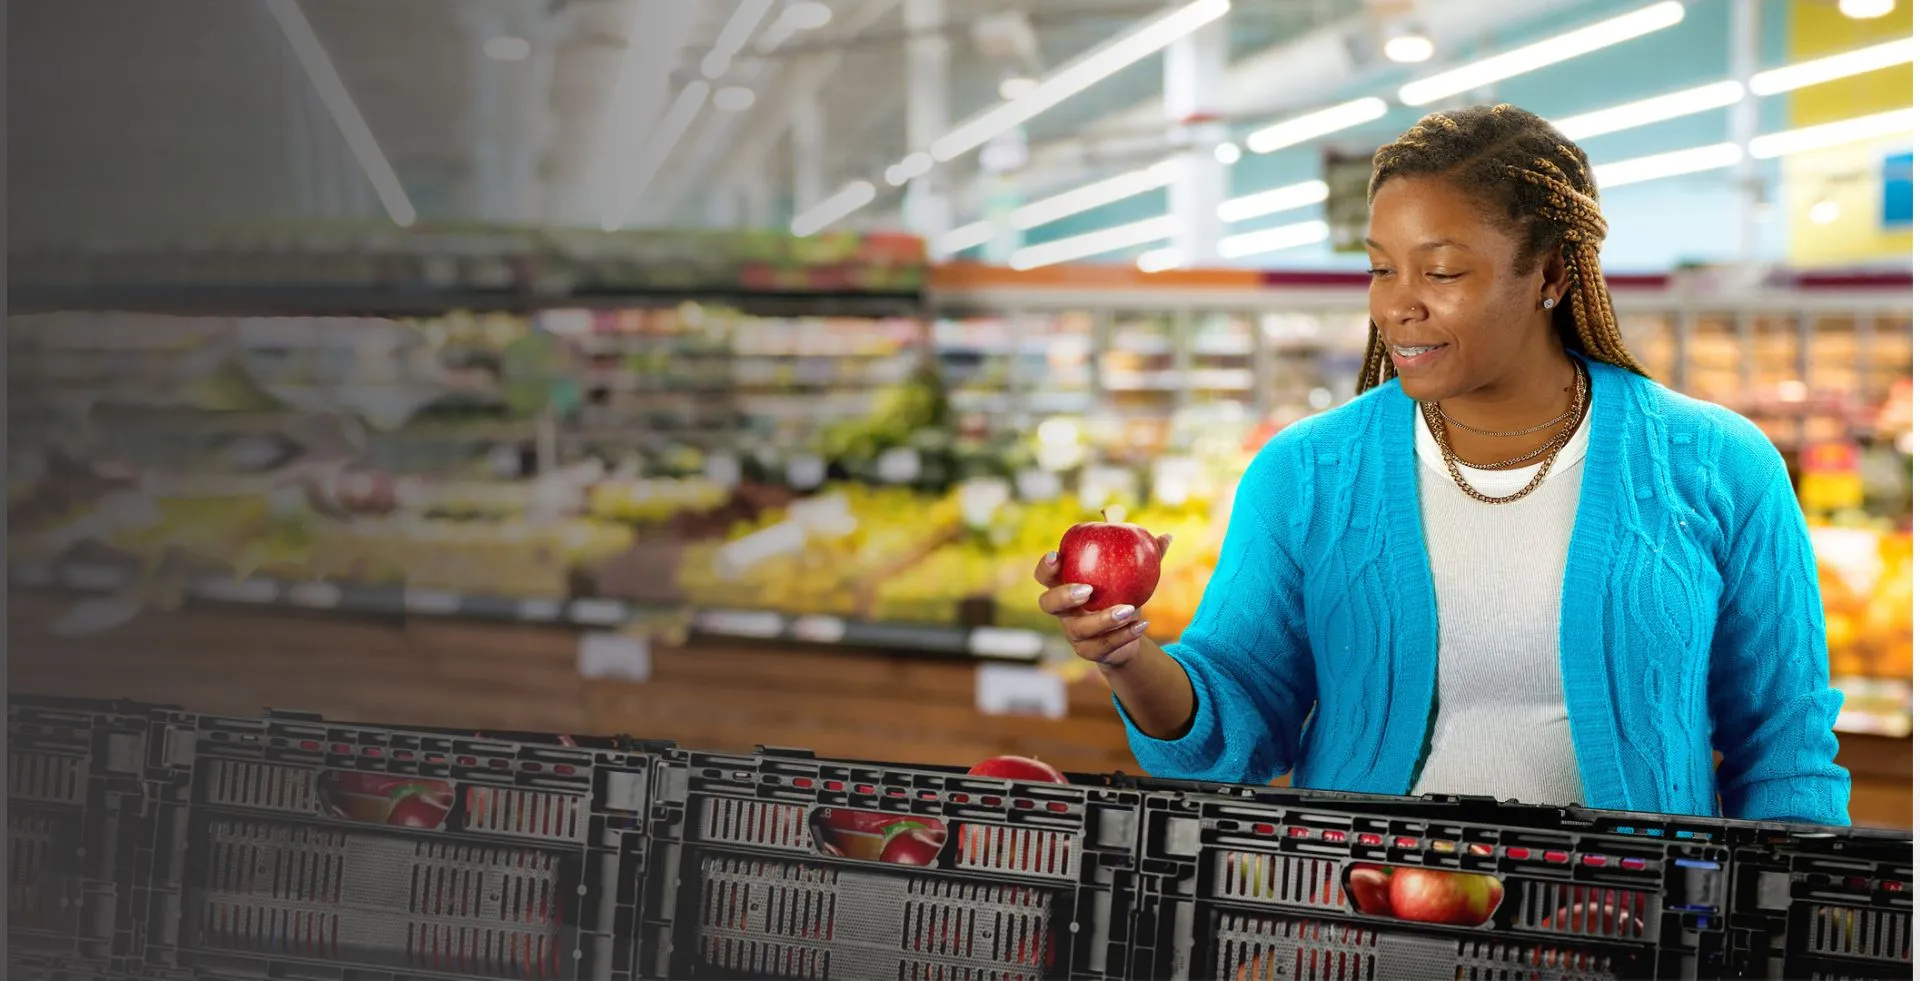 Woman in grocery store shops for fresh produce out of a reusable plastic container or RPC